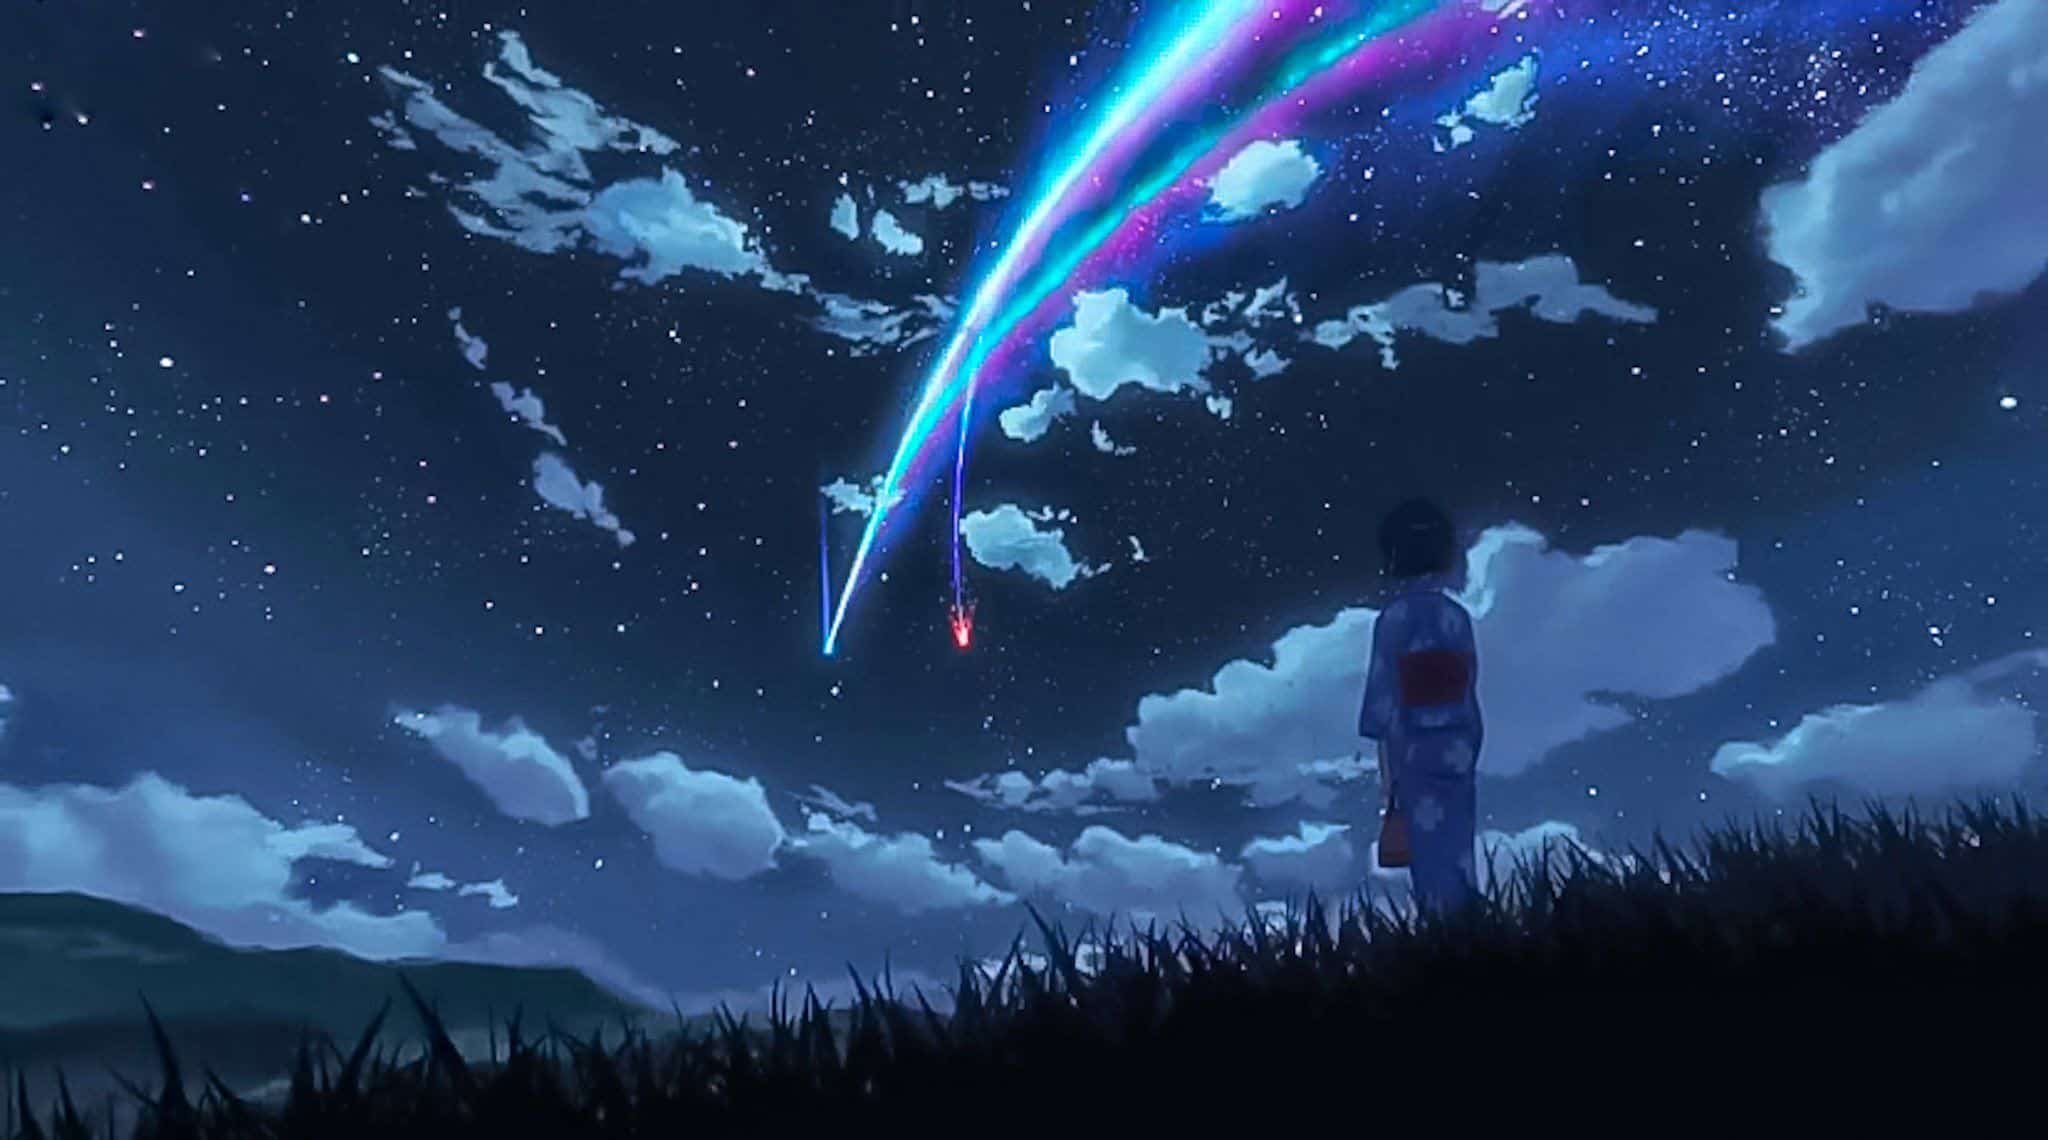 One Of The Most Beautiful And The Third Most Highest-Grossing Anime: Your Name